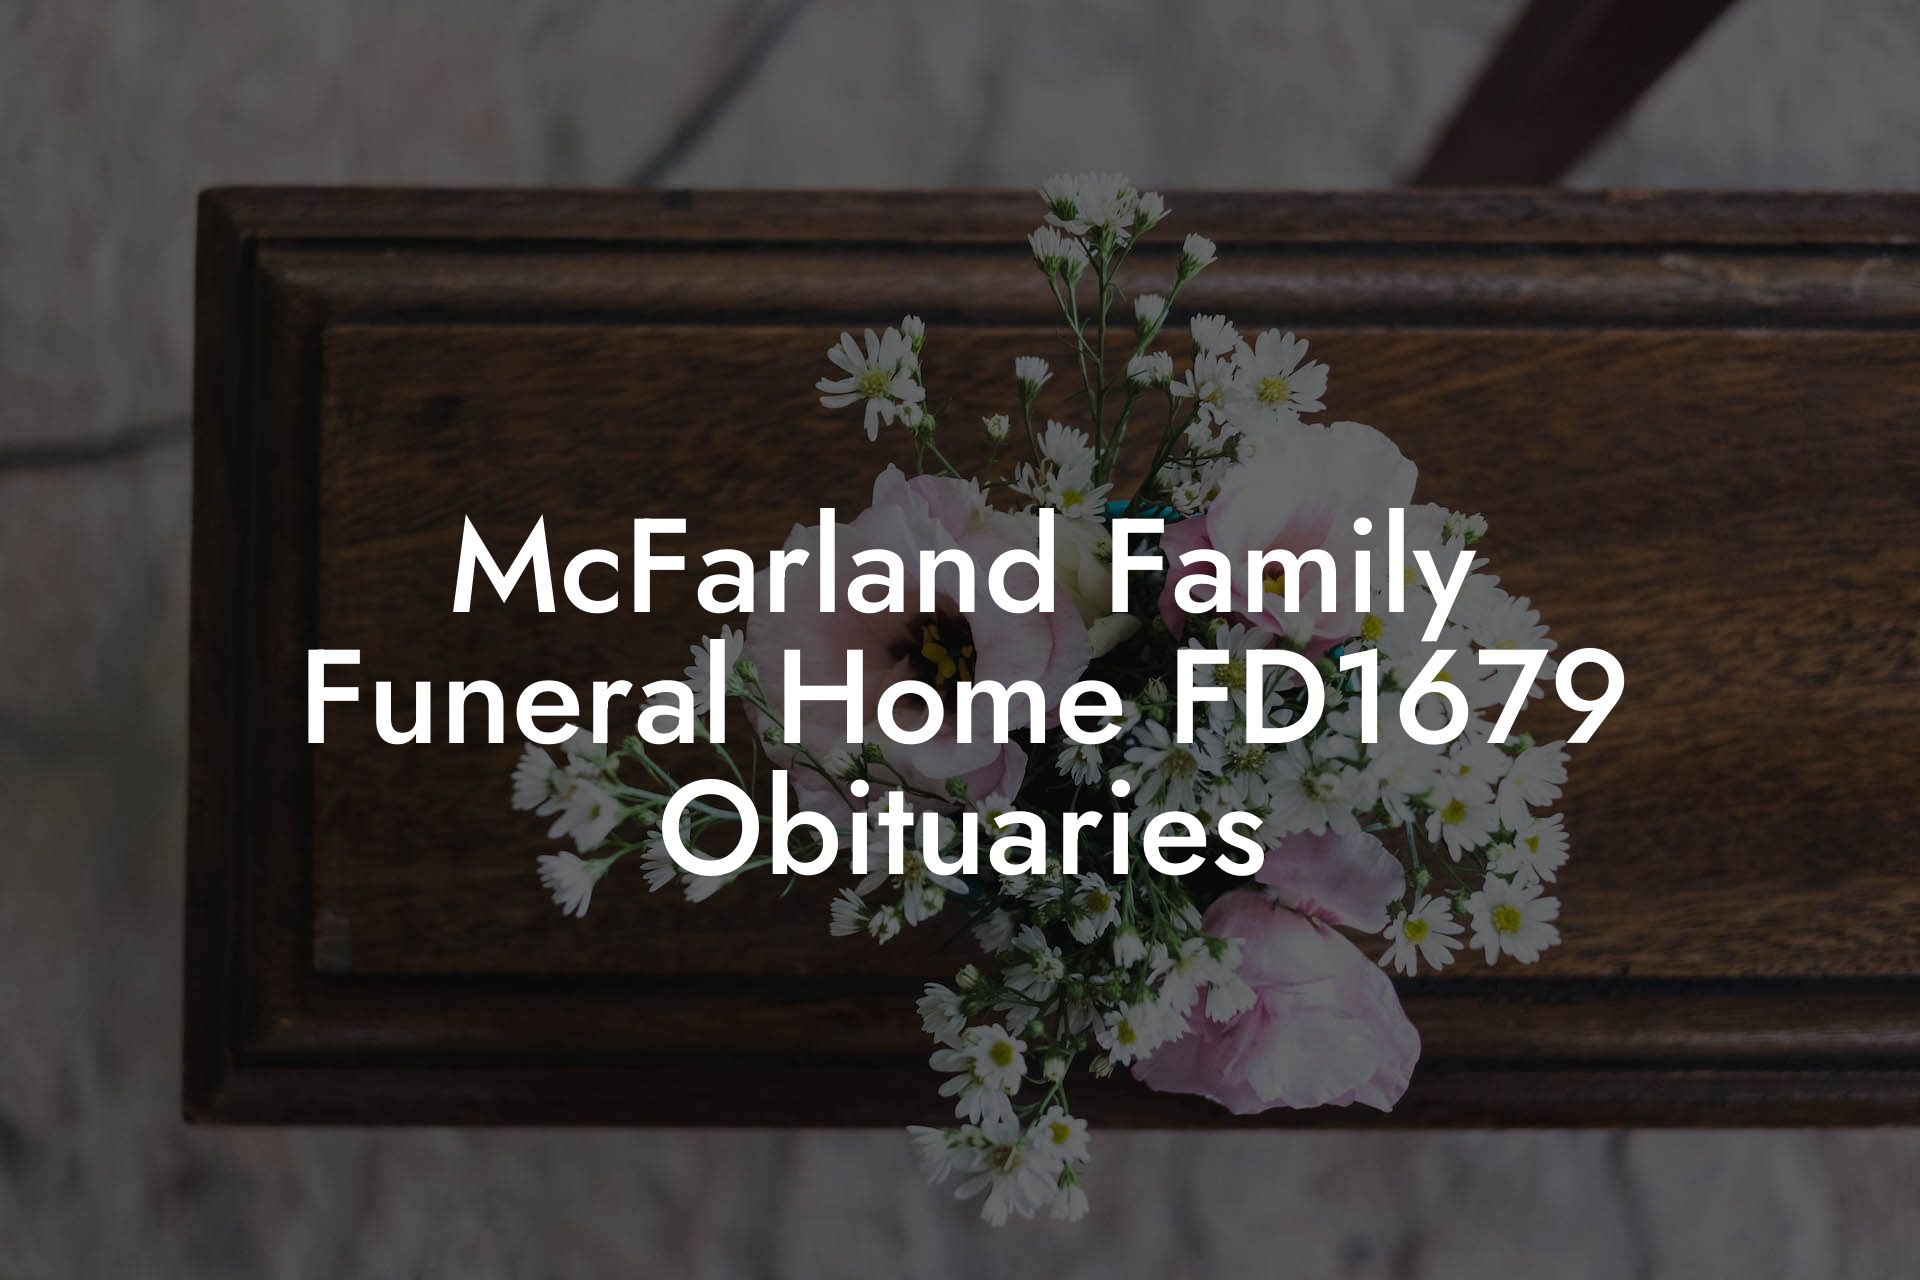 McFarland Family Funeral Home FD1679 Obituaries